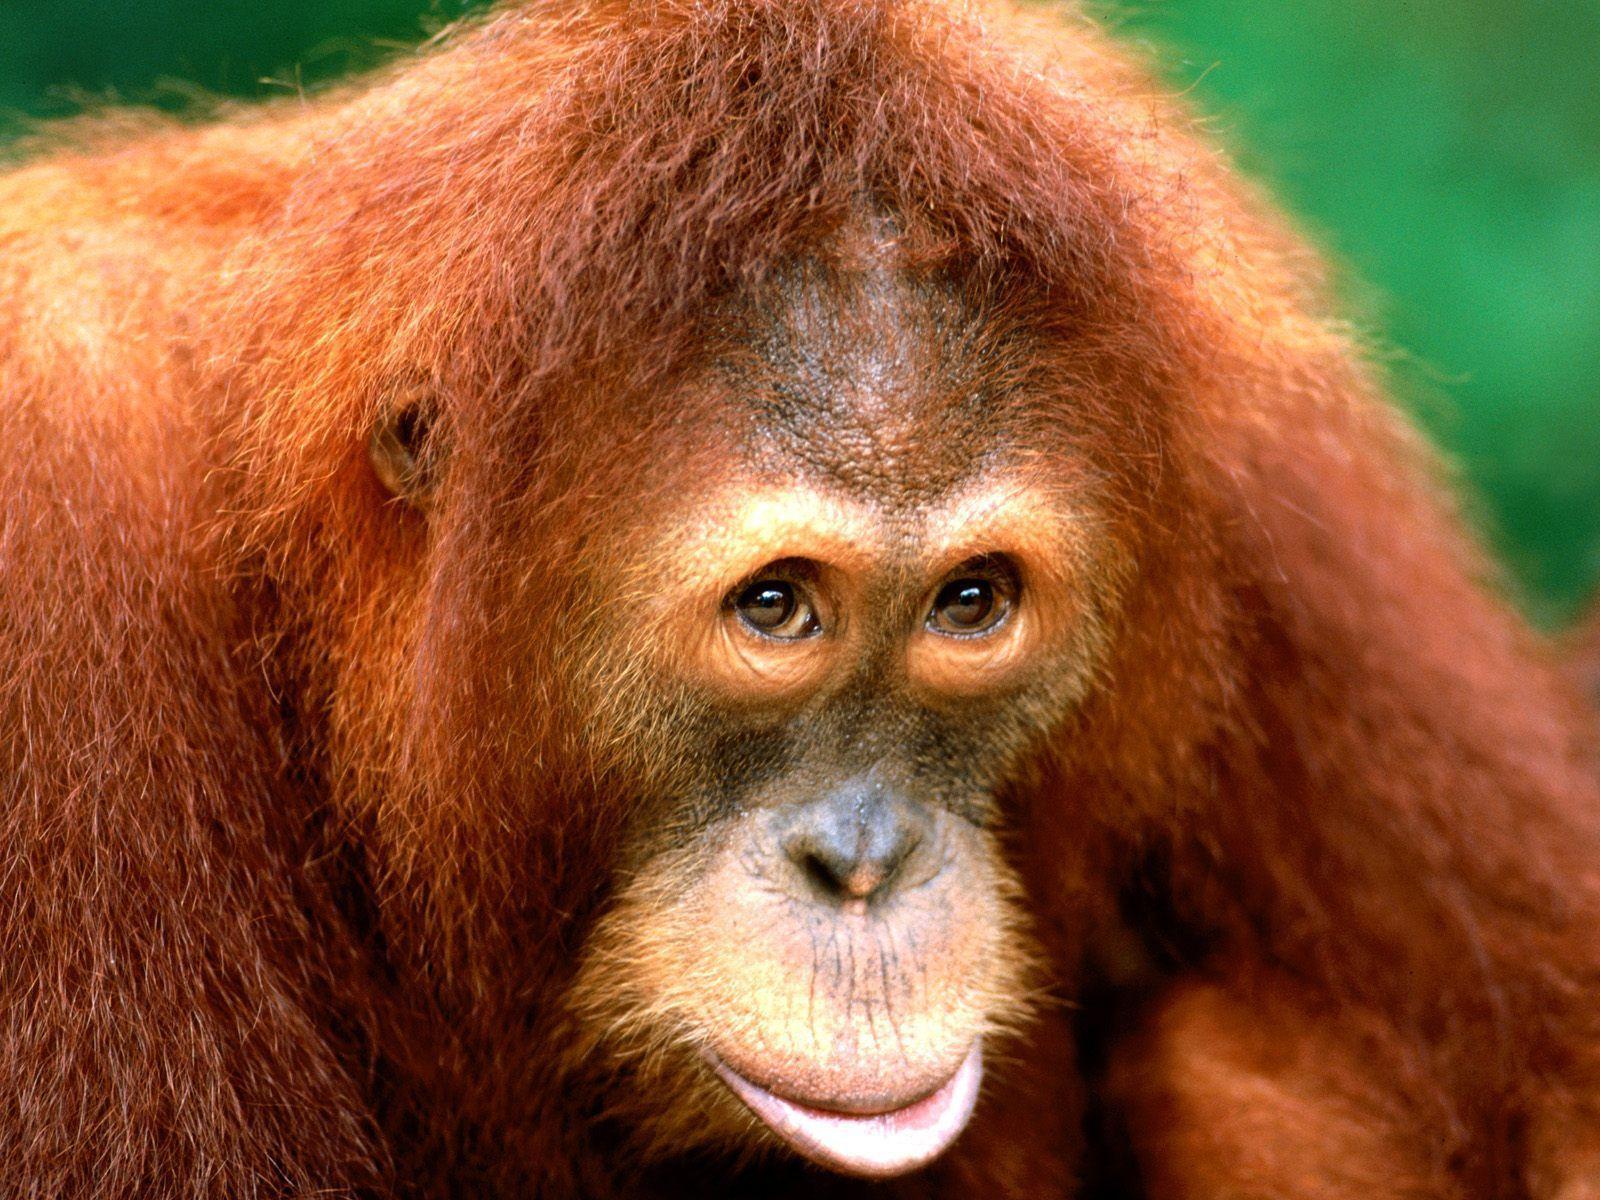 Wallpaper > Animals > DONT SCOLD ME ANYMORE AM SCARED ORANGUTAN